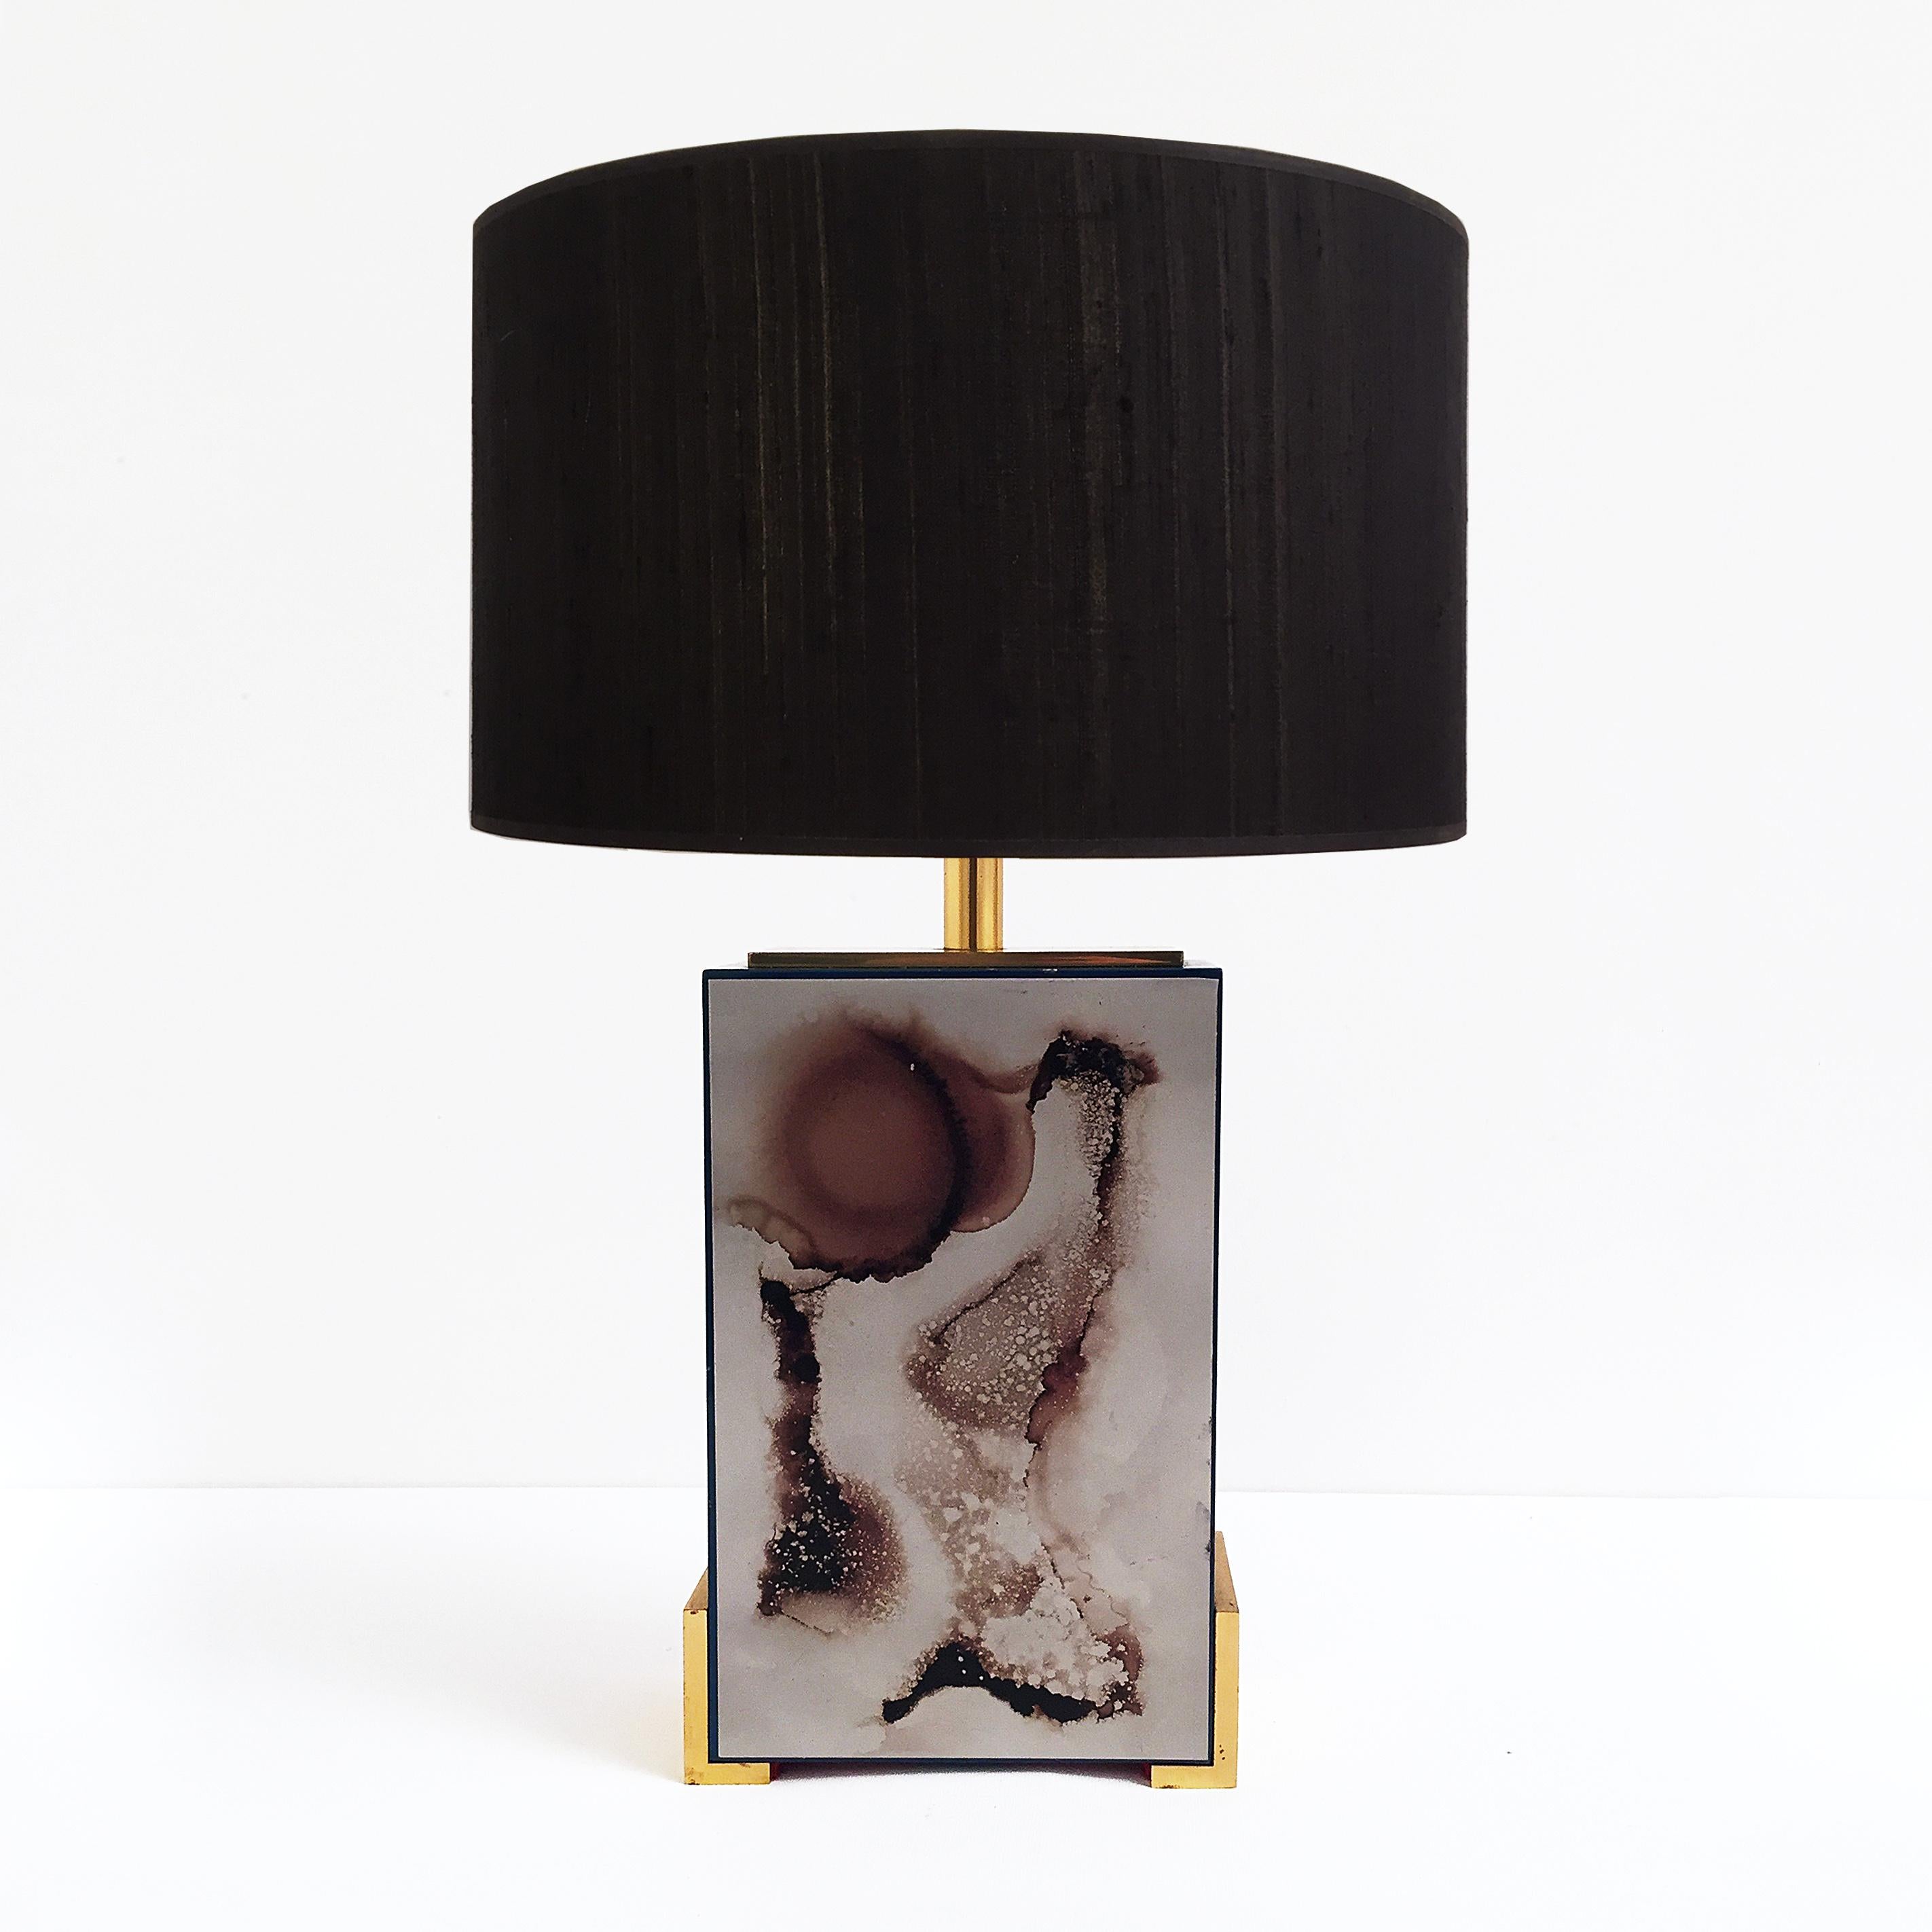 Unique table lamp in blue enamel with burned chrome design and brass elegant accents. Signed J.G. on bottom left. An elegant and modern design (shade is only for display purposes).
 